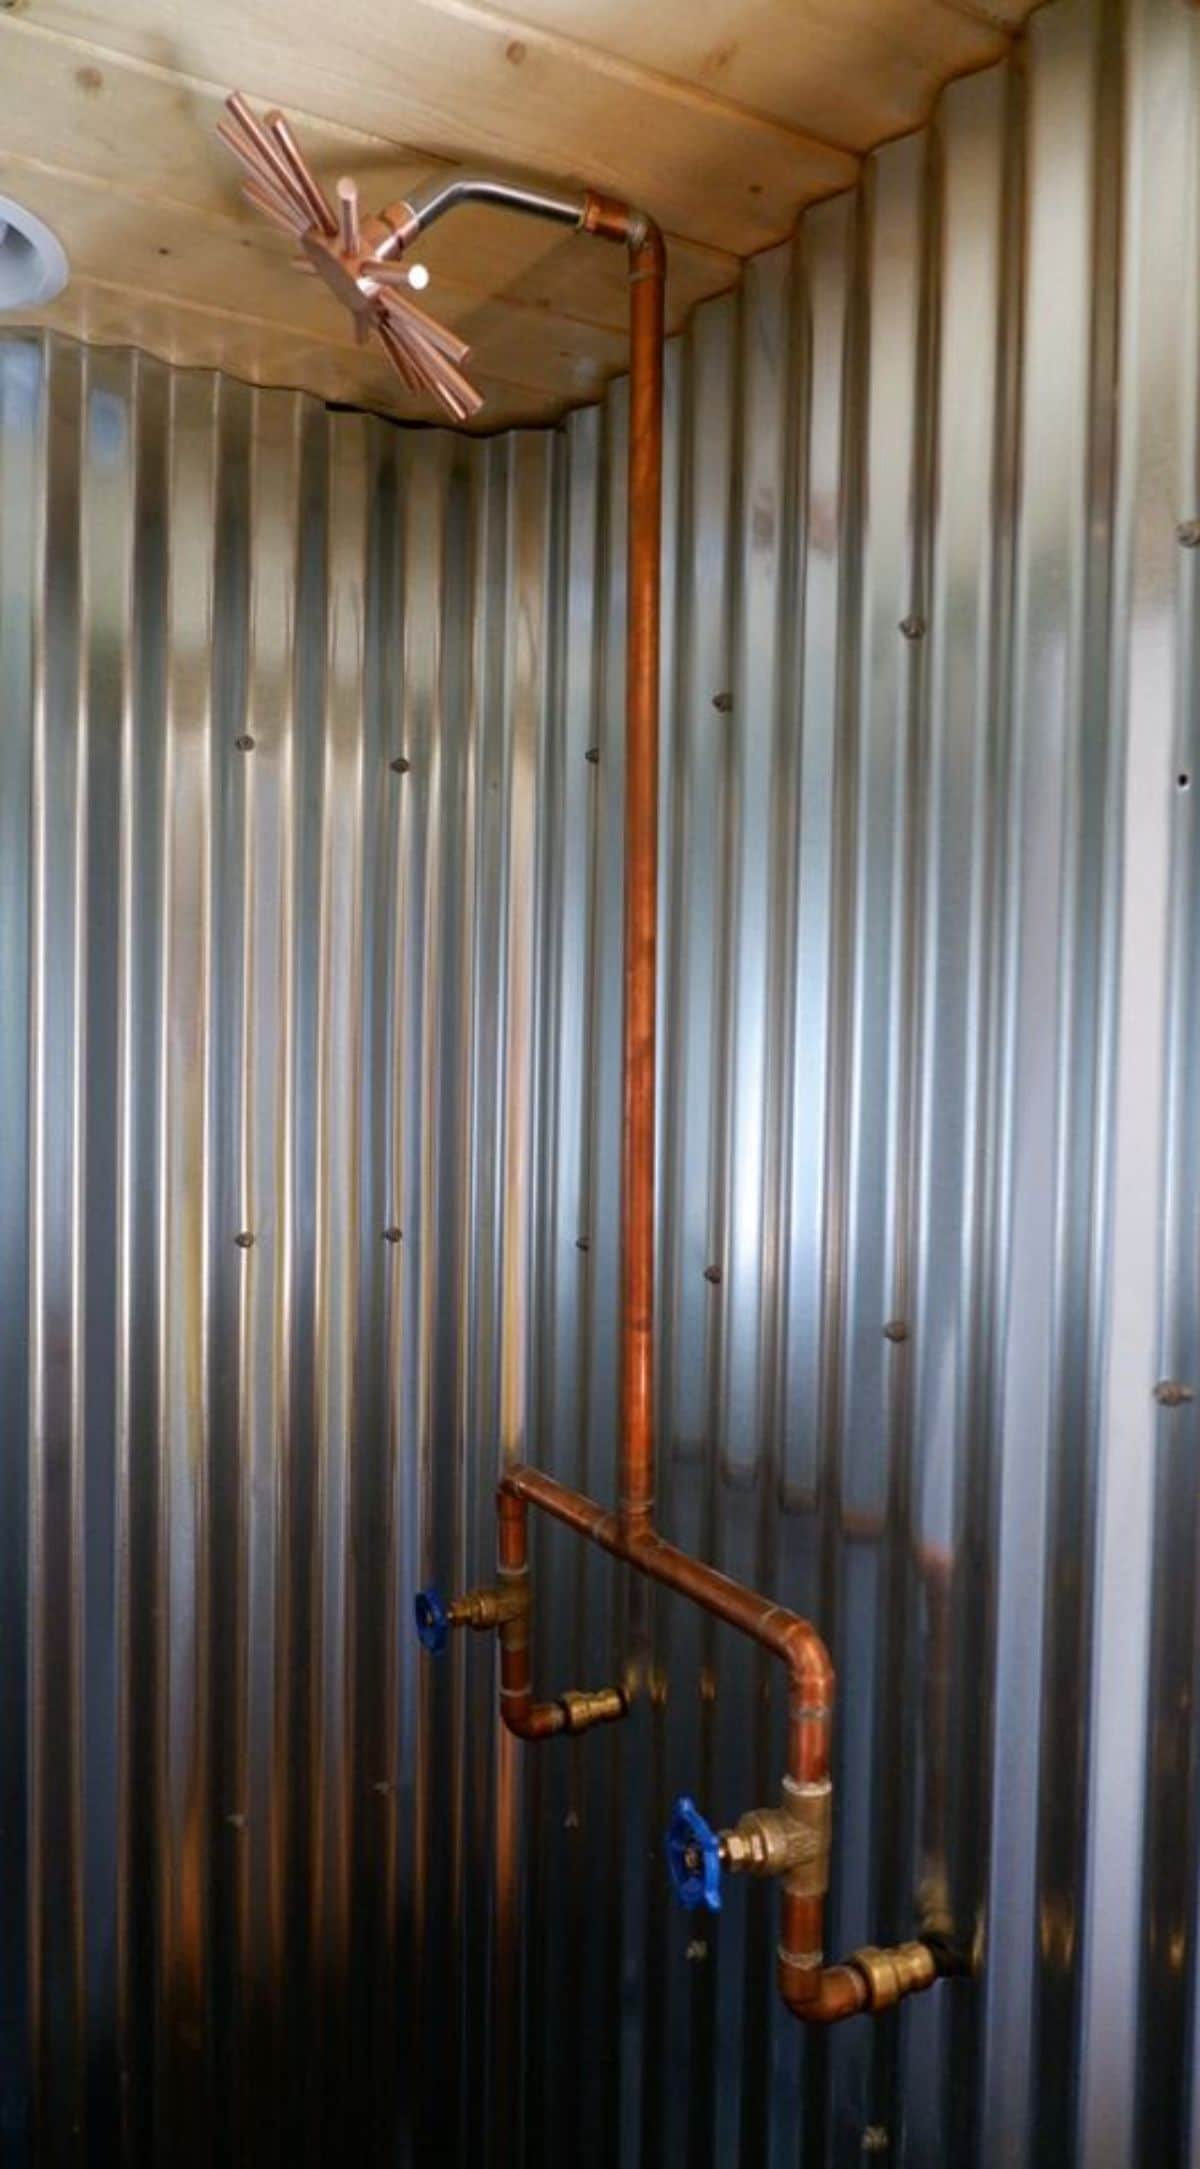 corrugated metal shower stall with brass pipes exposed